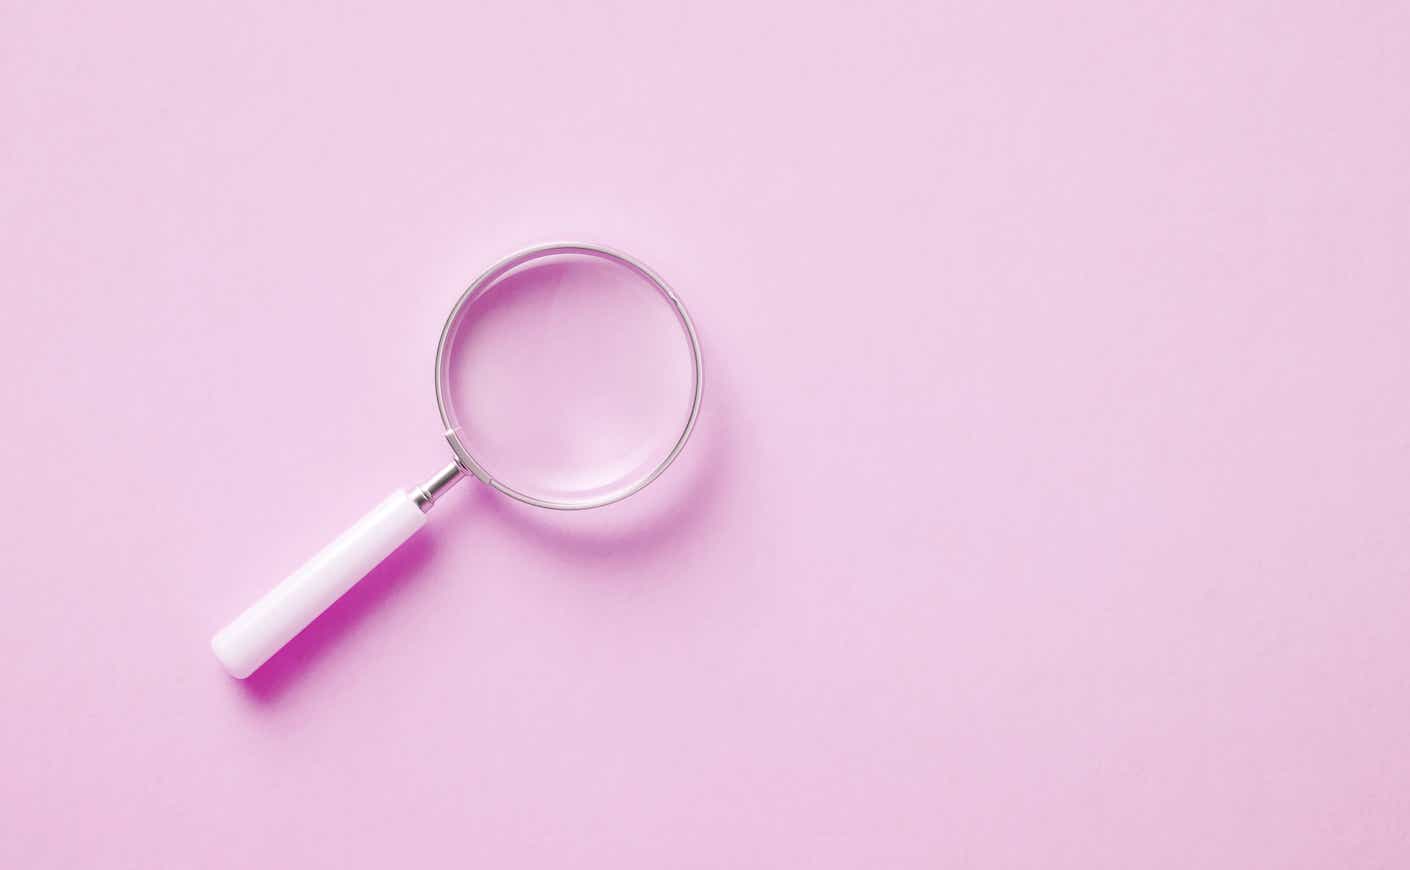 Magnifying glass on pink background